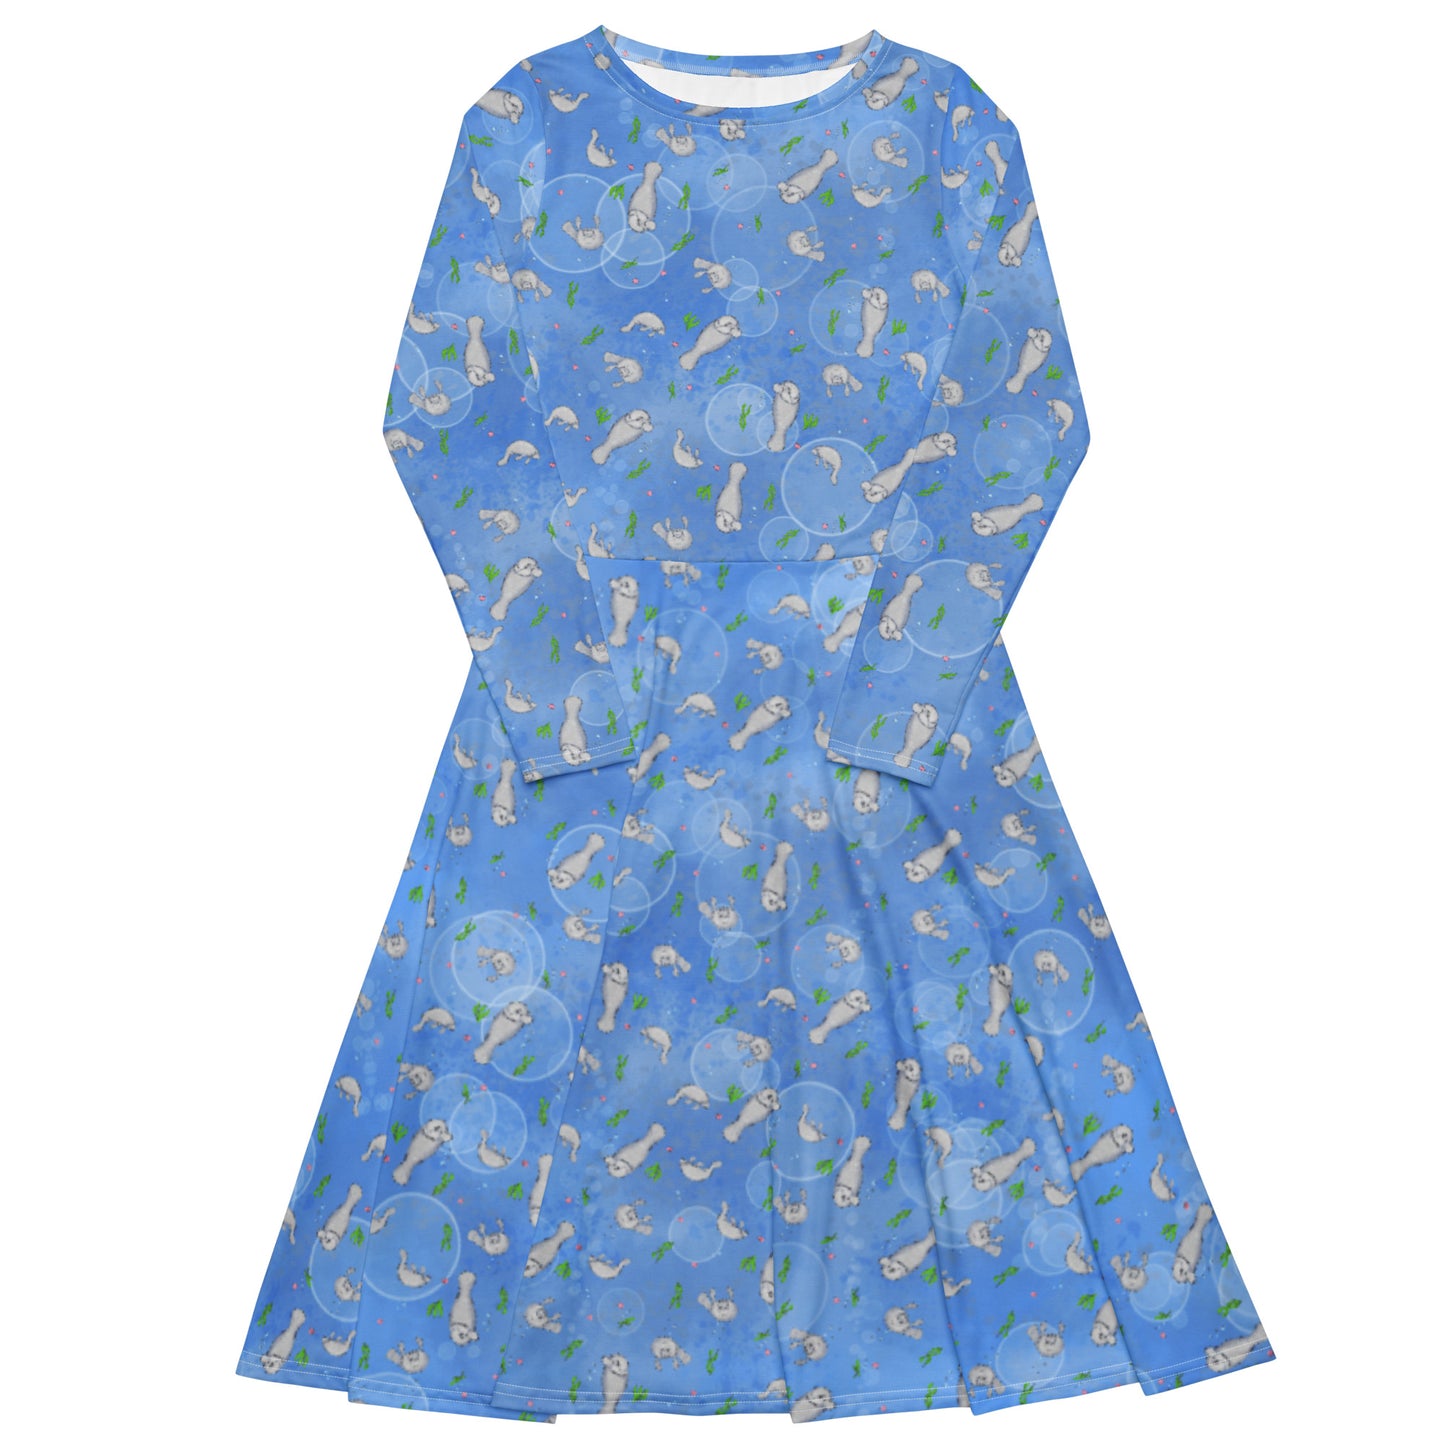 Long sleeve midi dress with fitted waist, flared bottom, and side pockets. Features a patterned design of manatees, seashells, seaweed, and bubbles on an ocean blue background.